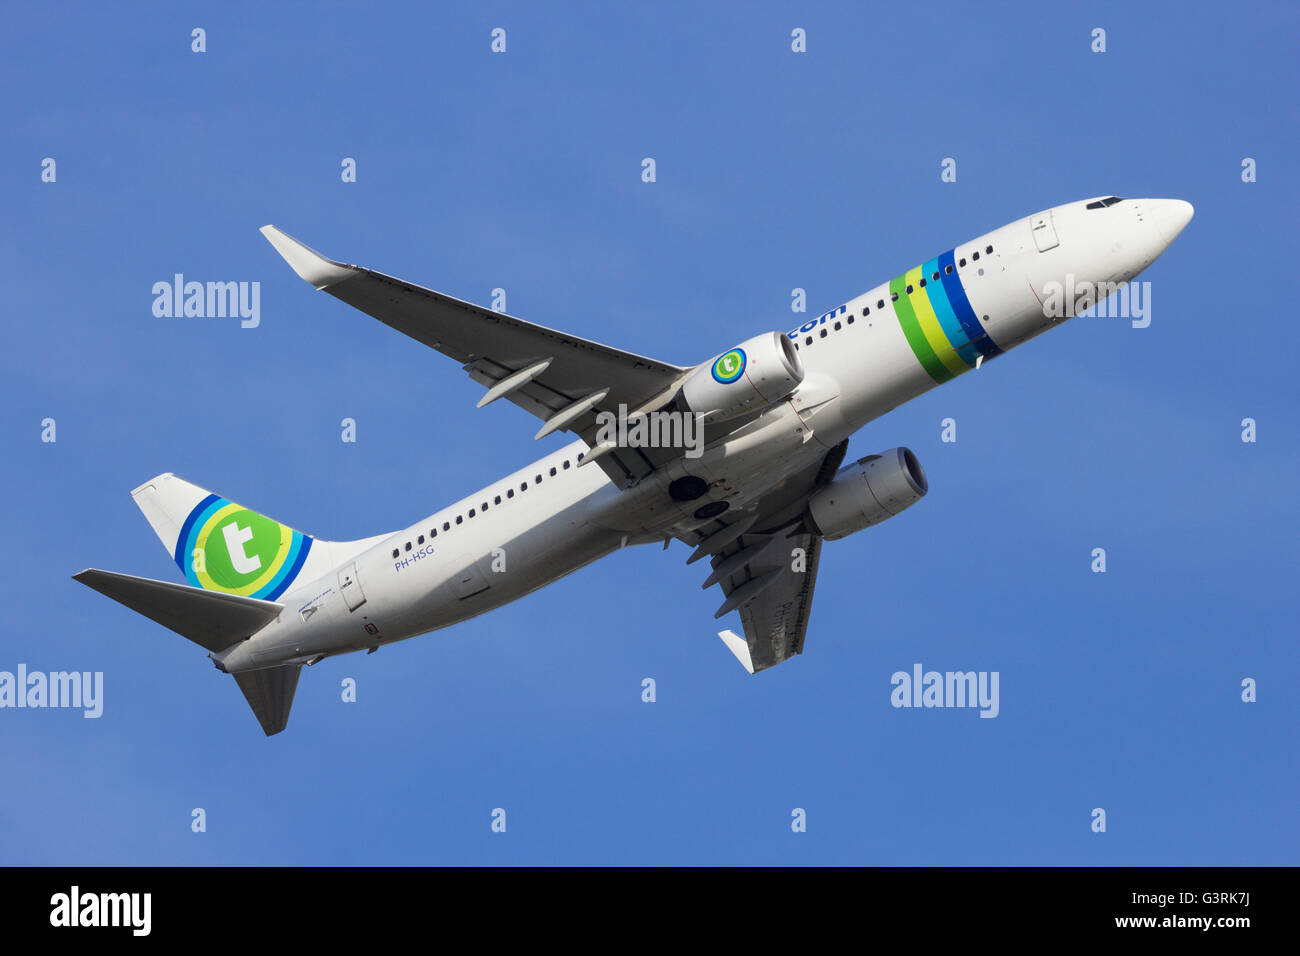 Transavia Boeing 737NG take-off from Schiphol airport Stock Photo